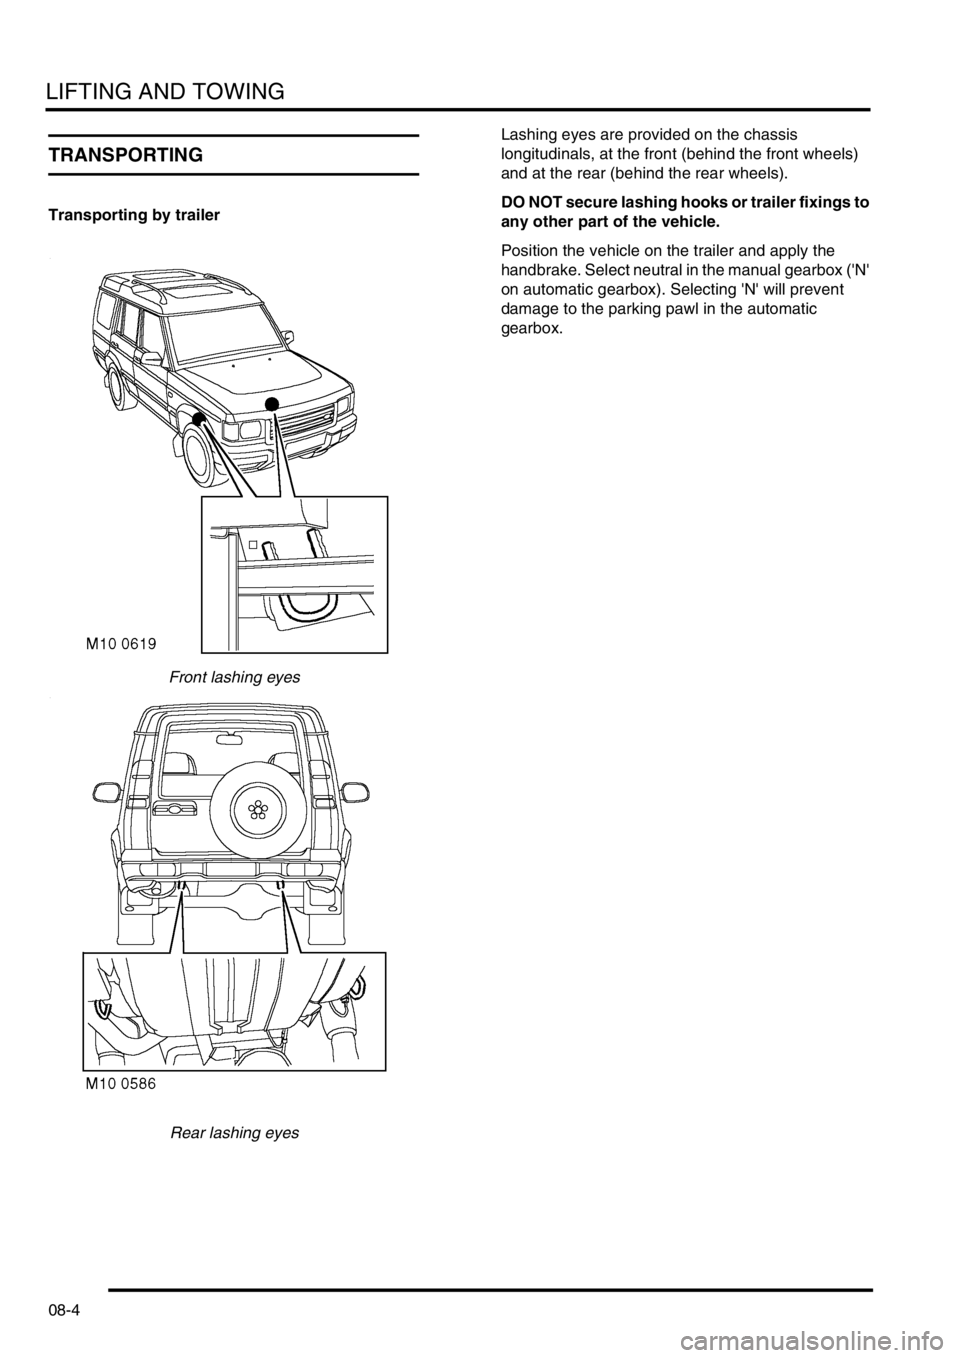 LAND ROVER DISCOVERY 1999  Workshop Manual LIFTING AND TOWING
08-4
TRANSPORTING
Transporting by trailer
Front lashing eyes
Rear lashing eyesLashing eyes are provided on the chassis 
longitudinals, at the front (behind the front wheels) 
and at